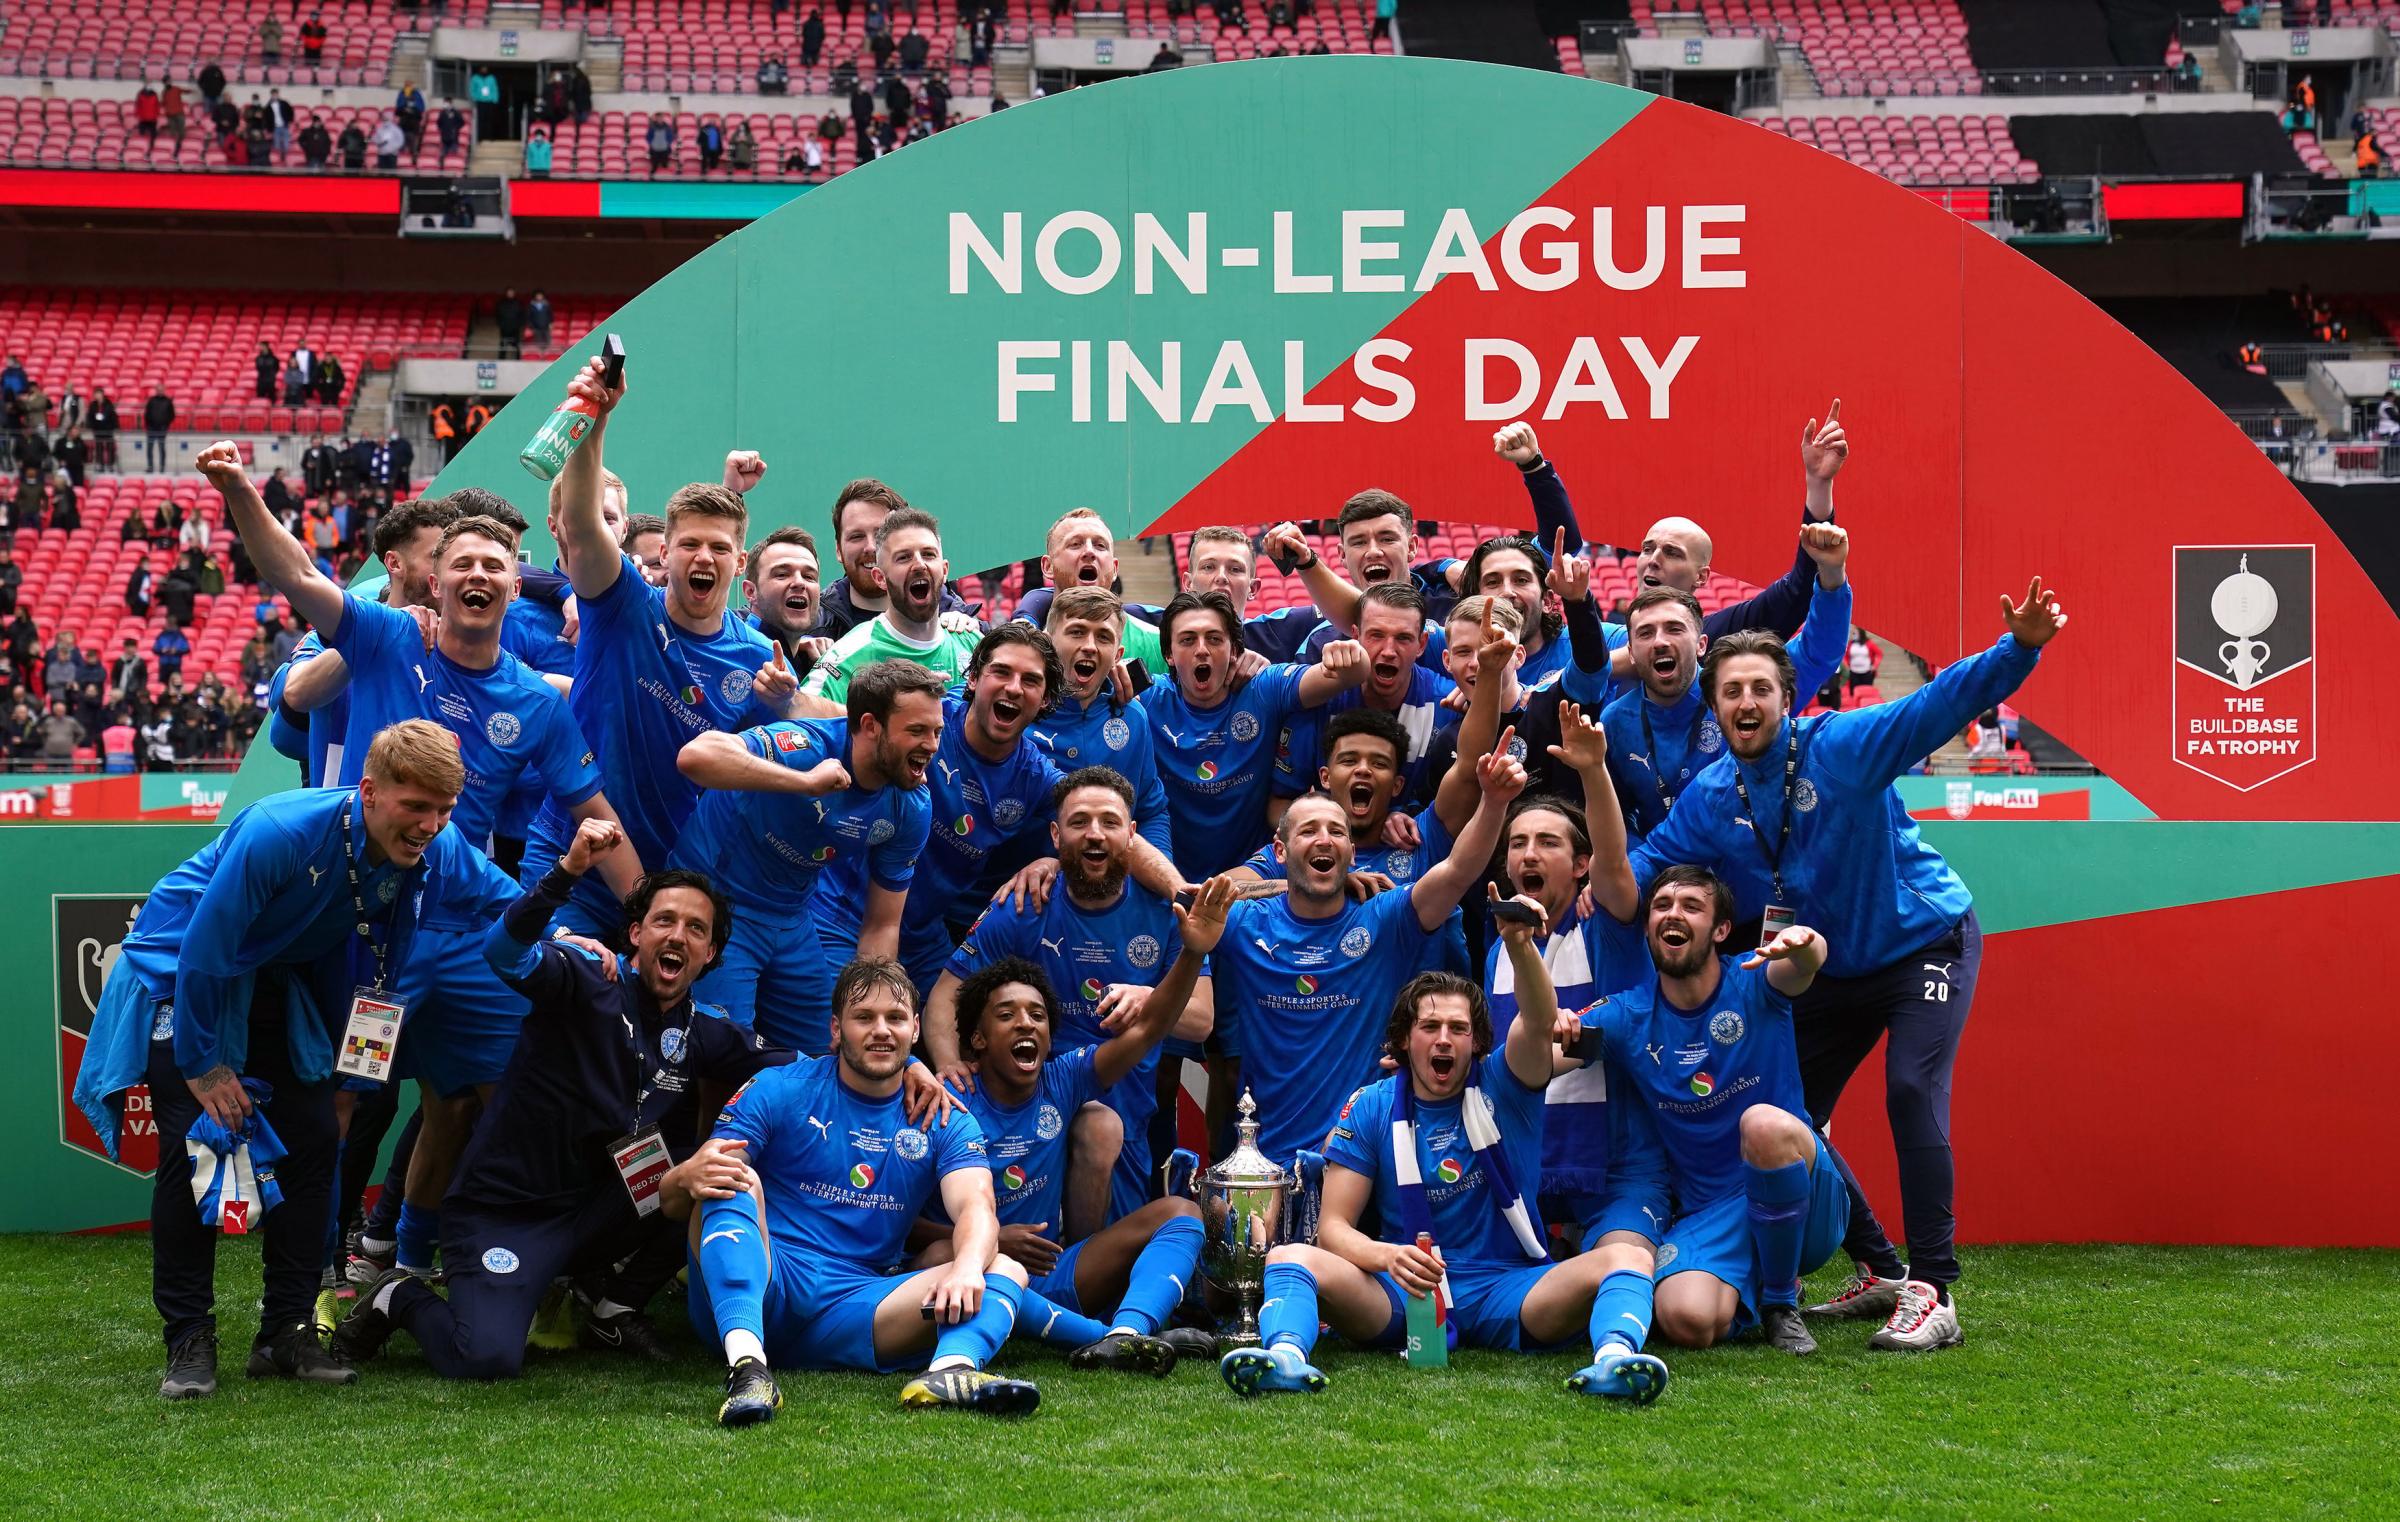 Warrington Rylands celebrate winning the Buildbase FA Vase 2020/21 Final at Wembley Stadium, London. Picture date: Saturday May 22, 2021. PA Photo. See PA story SOCCER Vase. Photo credit should read: Zac Goodwin/PA Wire. RESTRICTIONS: EDITORIAL USE